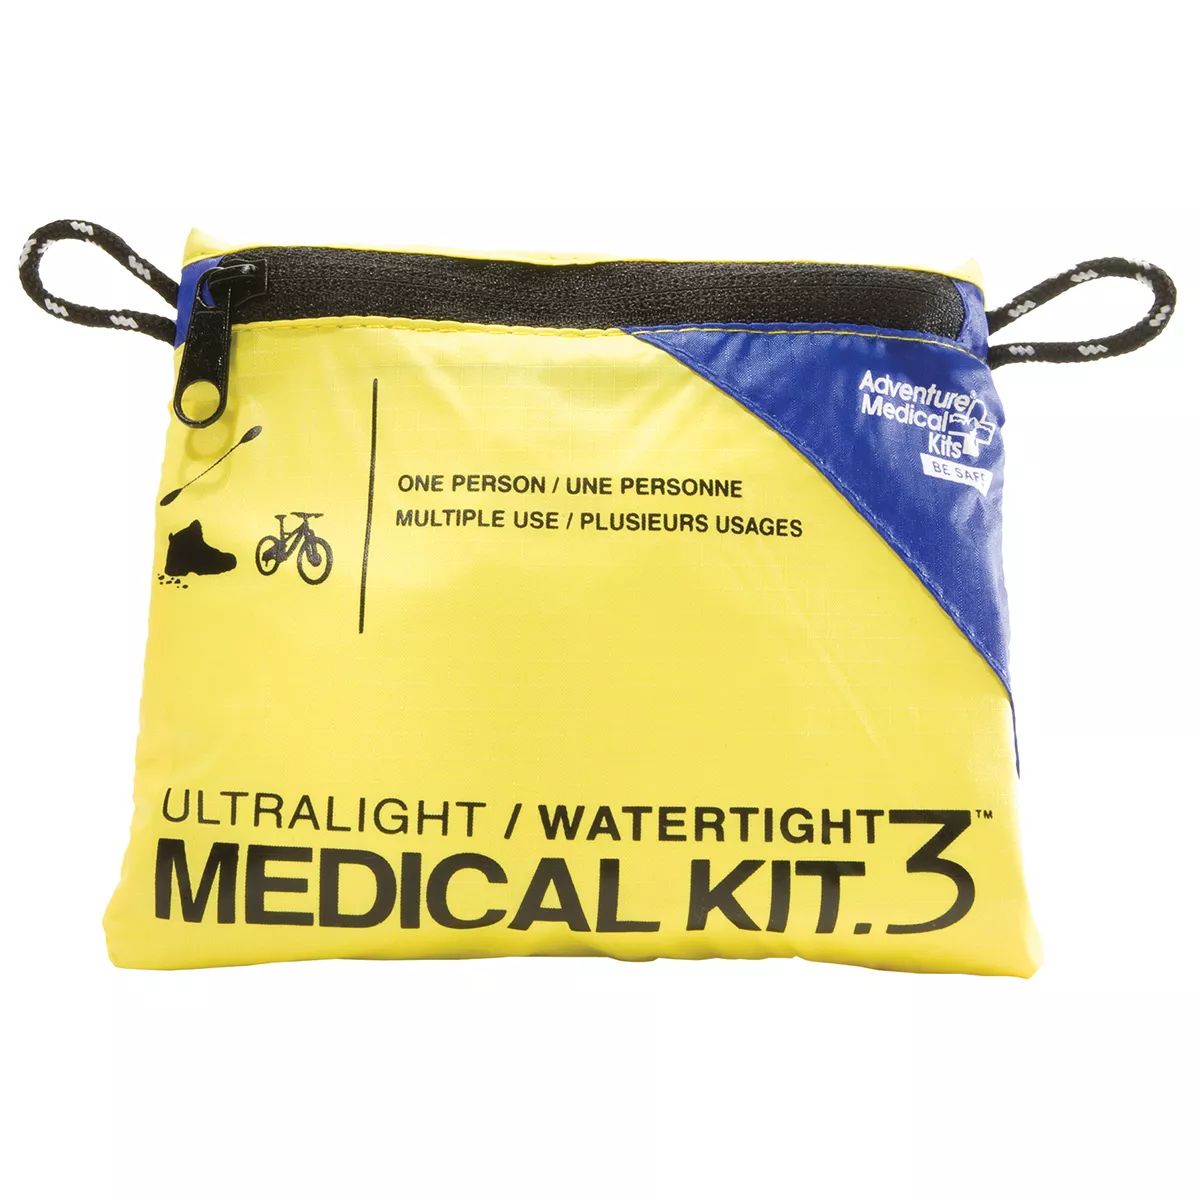 Image of Adventure Medical Kit Ultralight/Watertight .3 First Aid Medical Kit